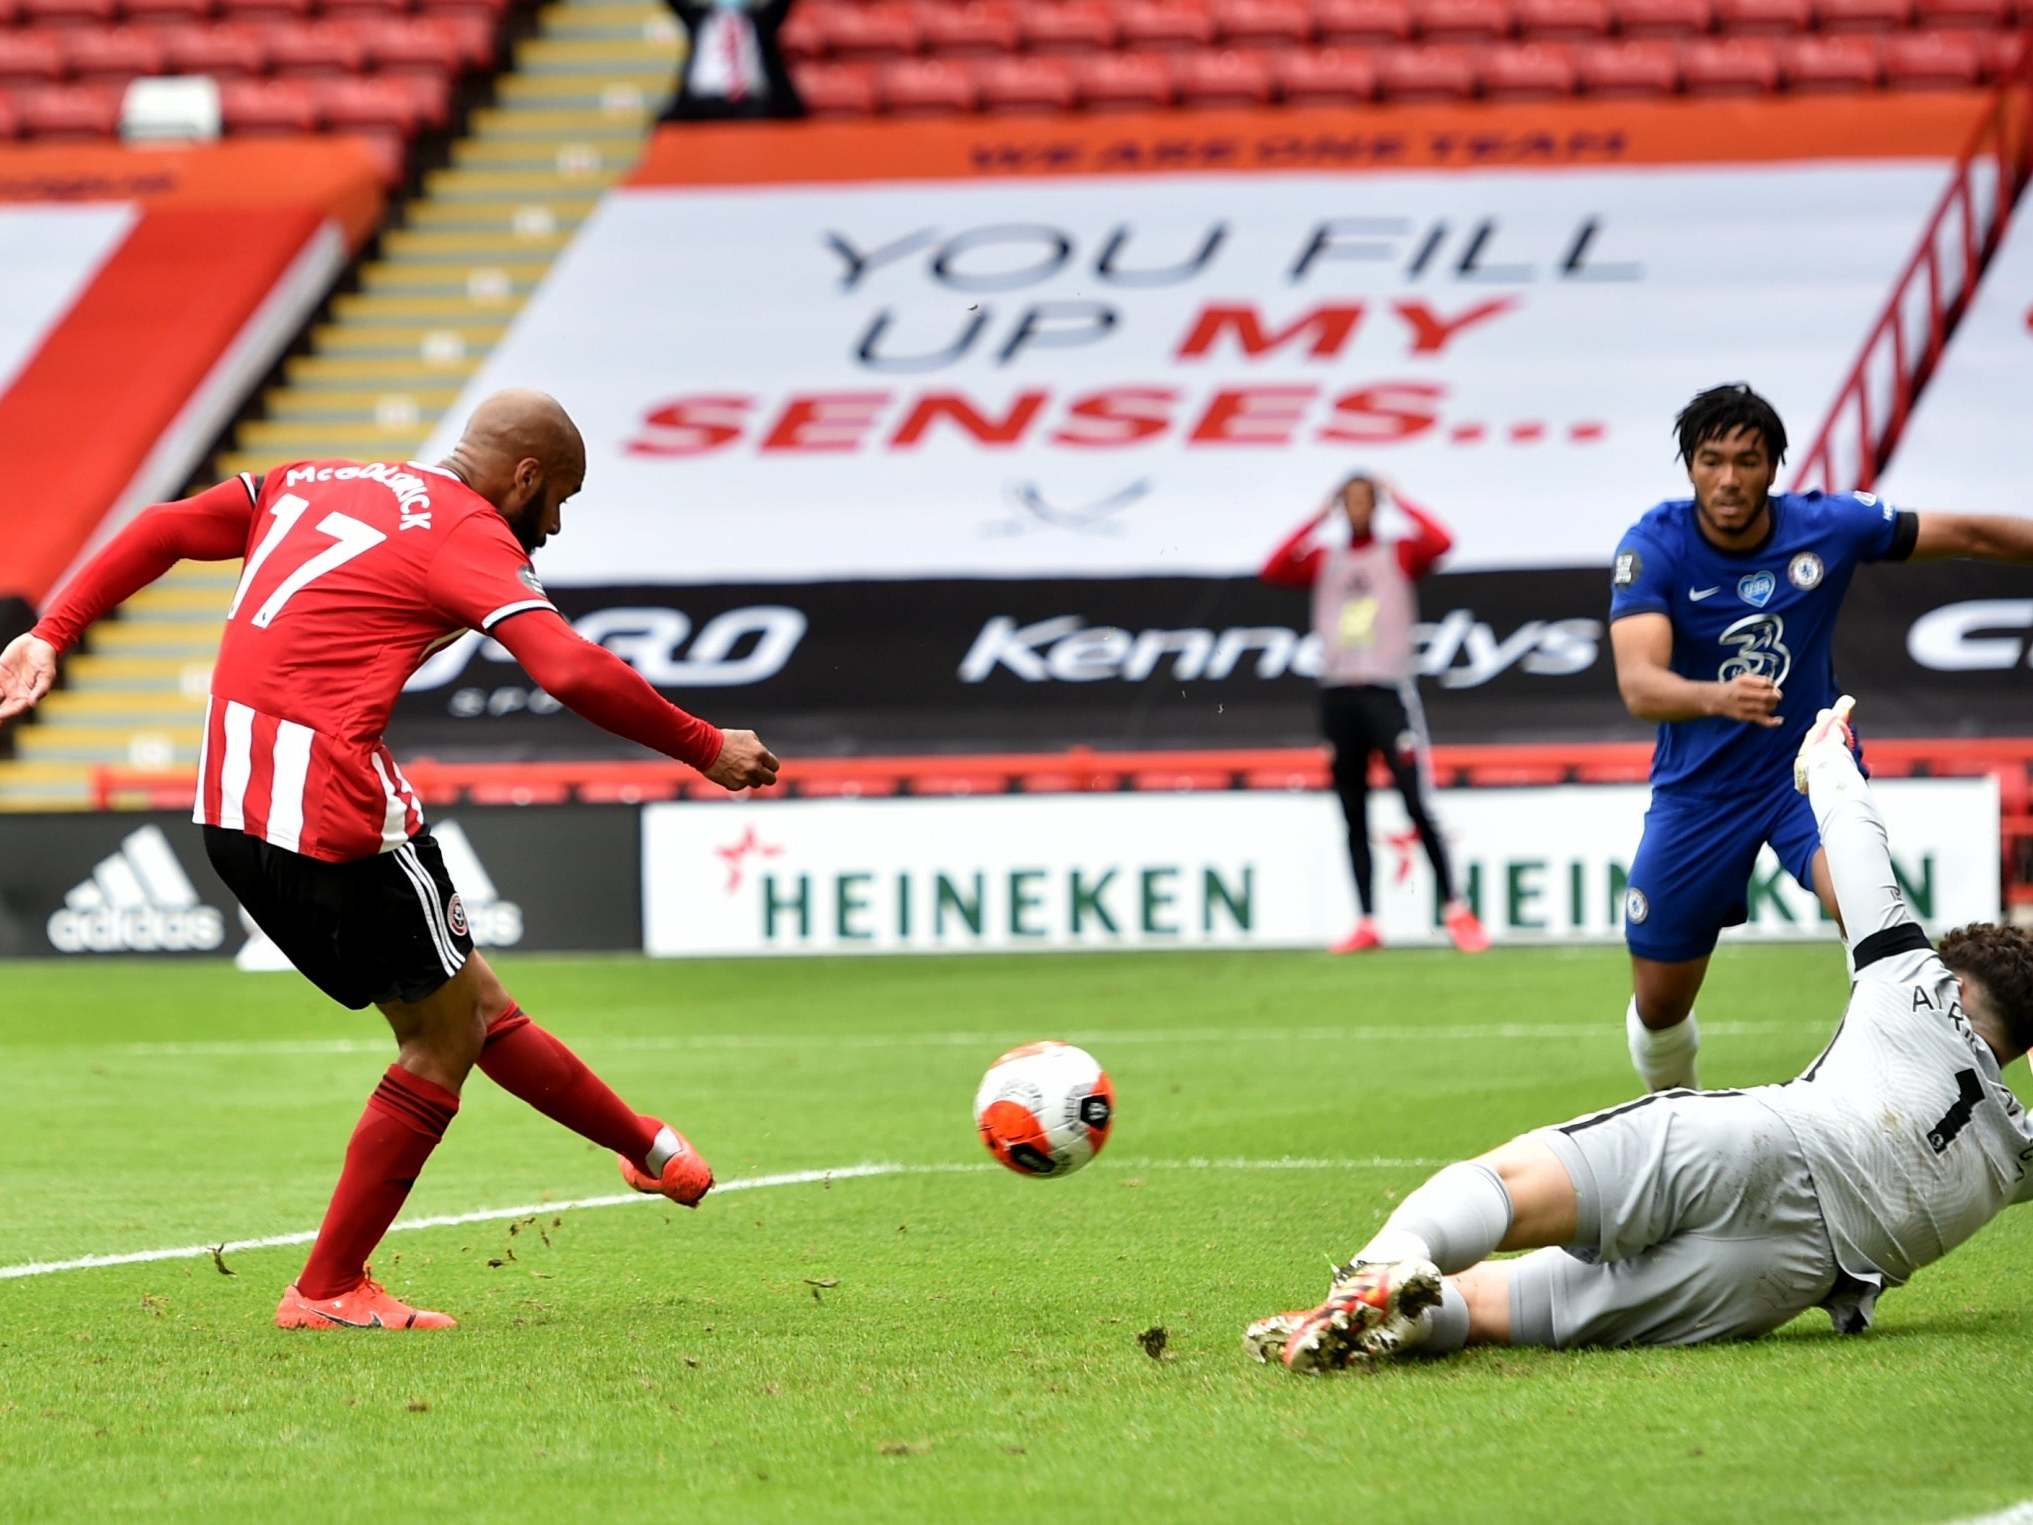 David McGoldrick fires Sheffield United in front in the first half